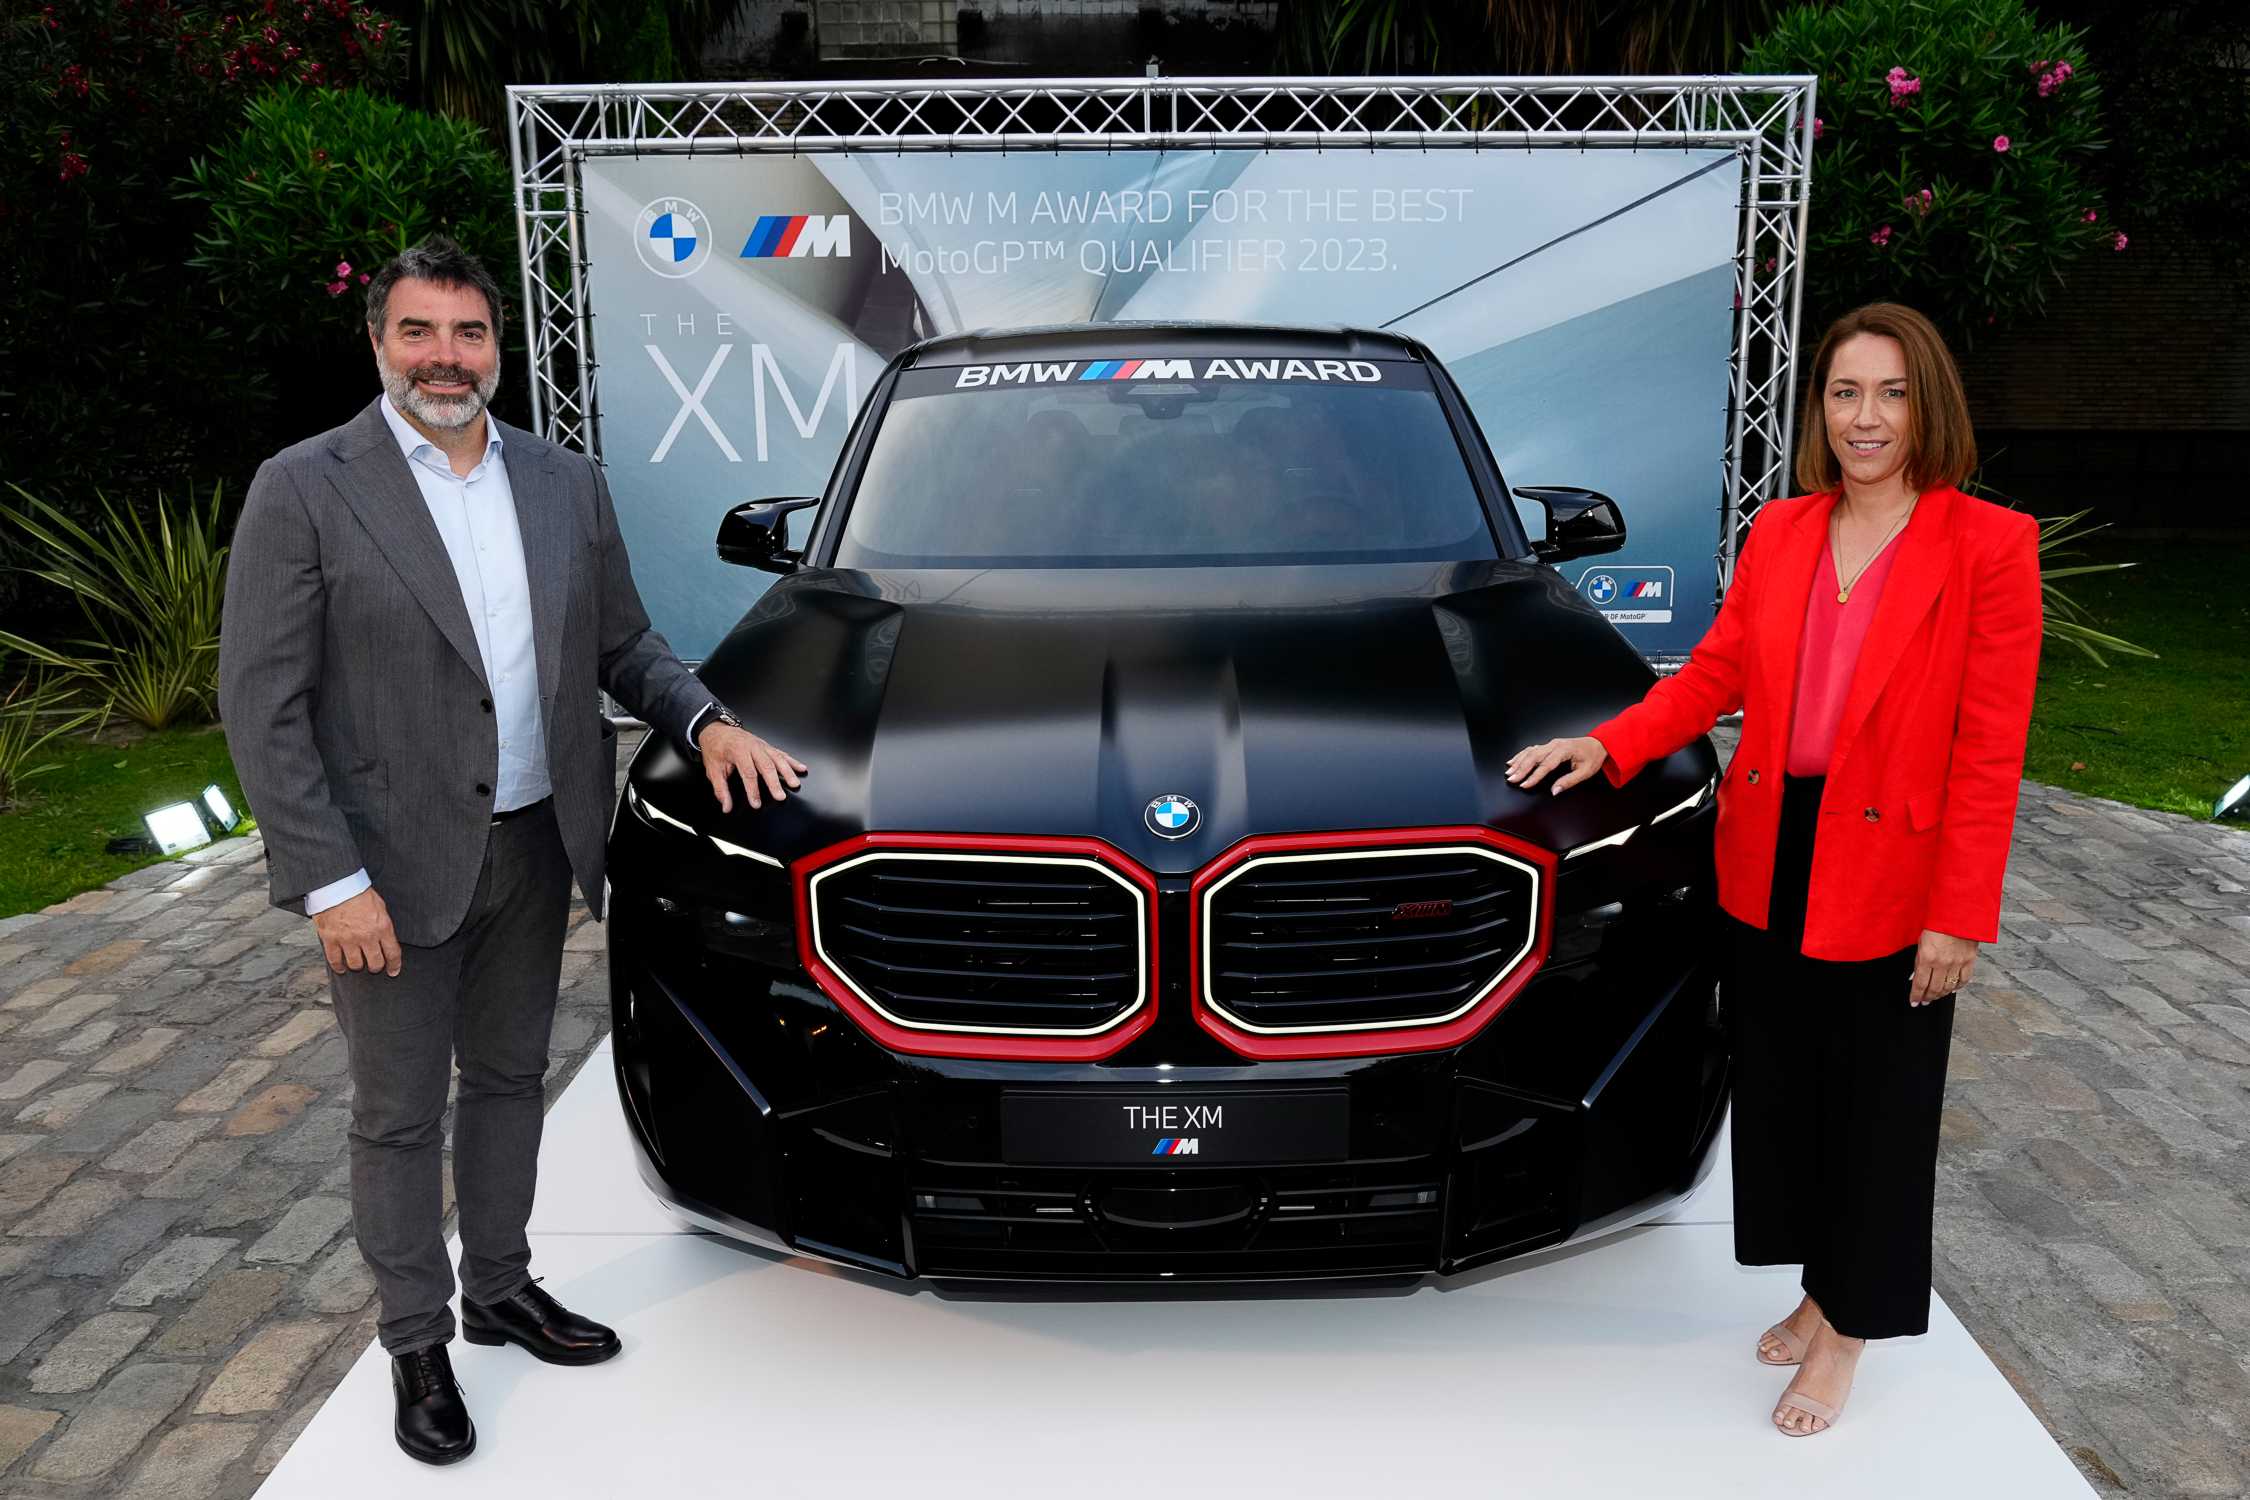 The new BMW XM Label Red is the exciting winner’s car for the BMW M Award 2023.